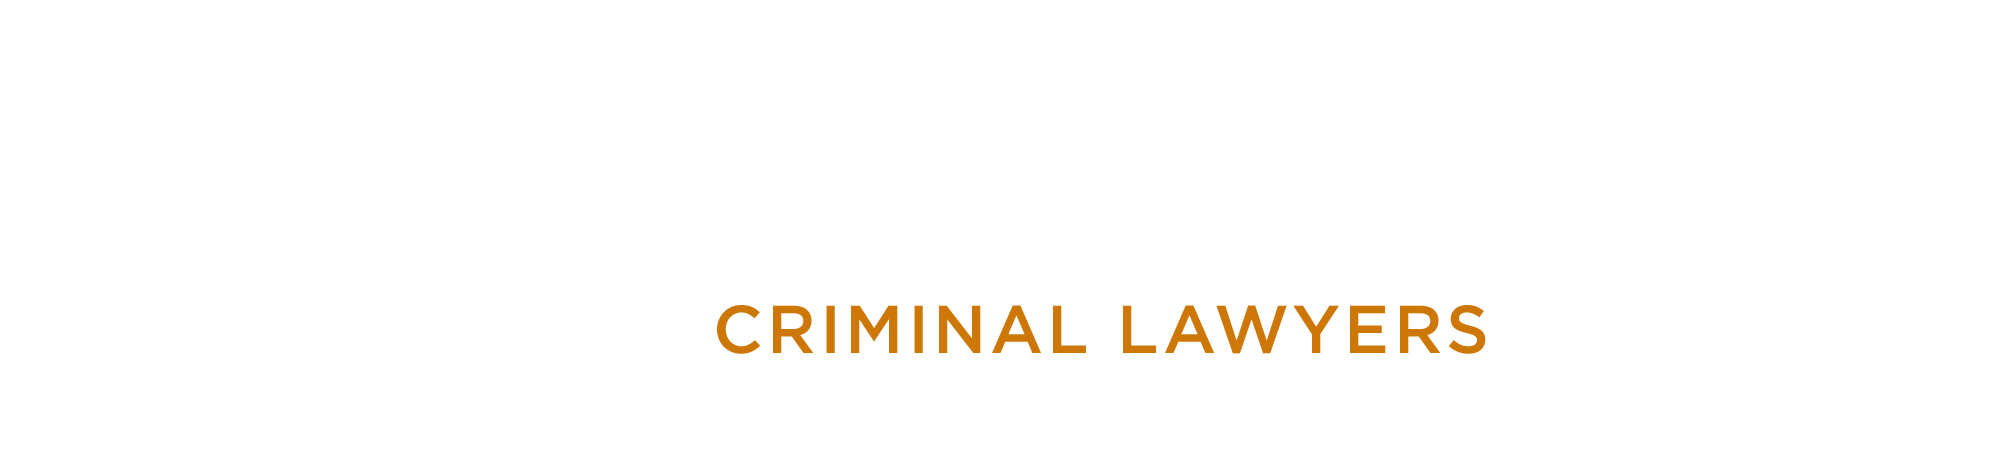 JustCharged.com